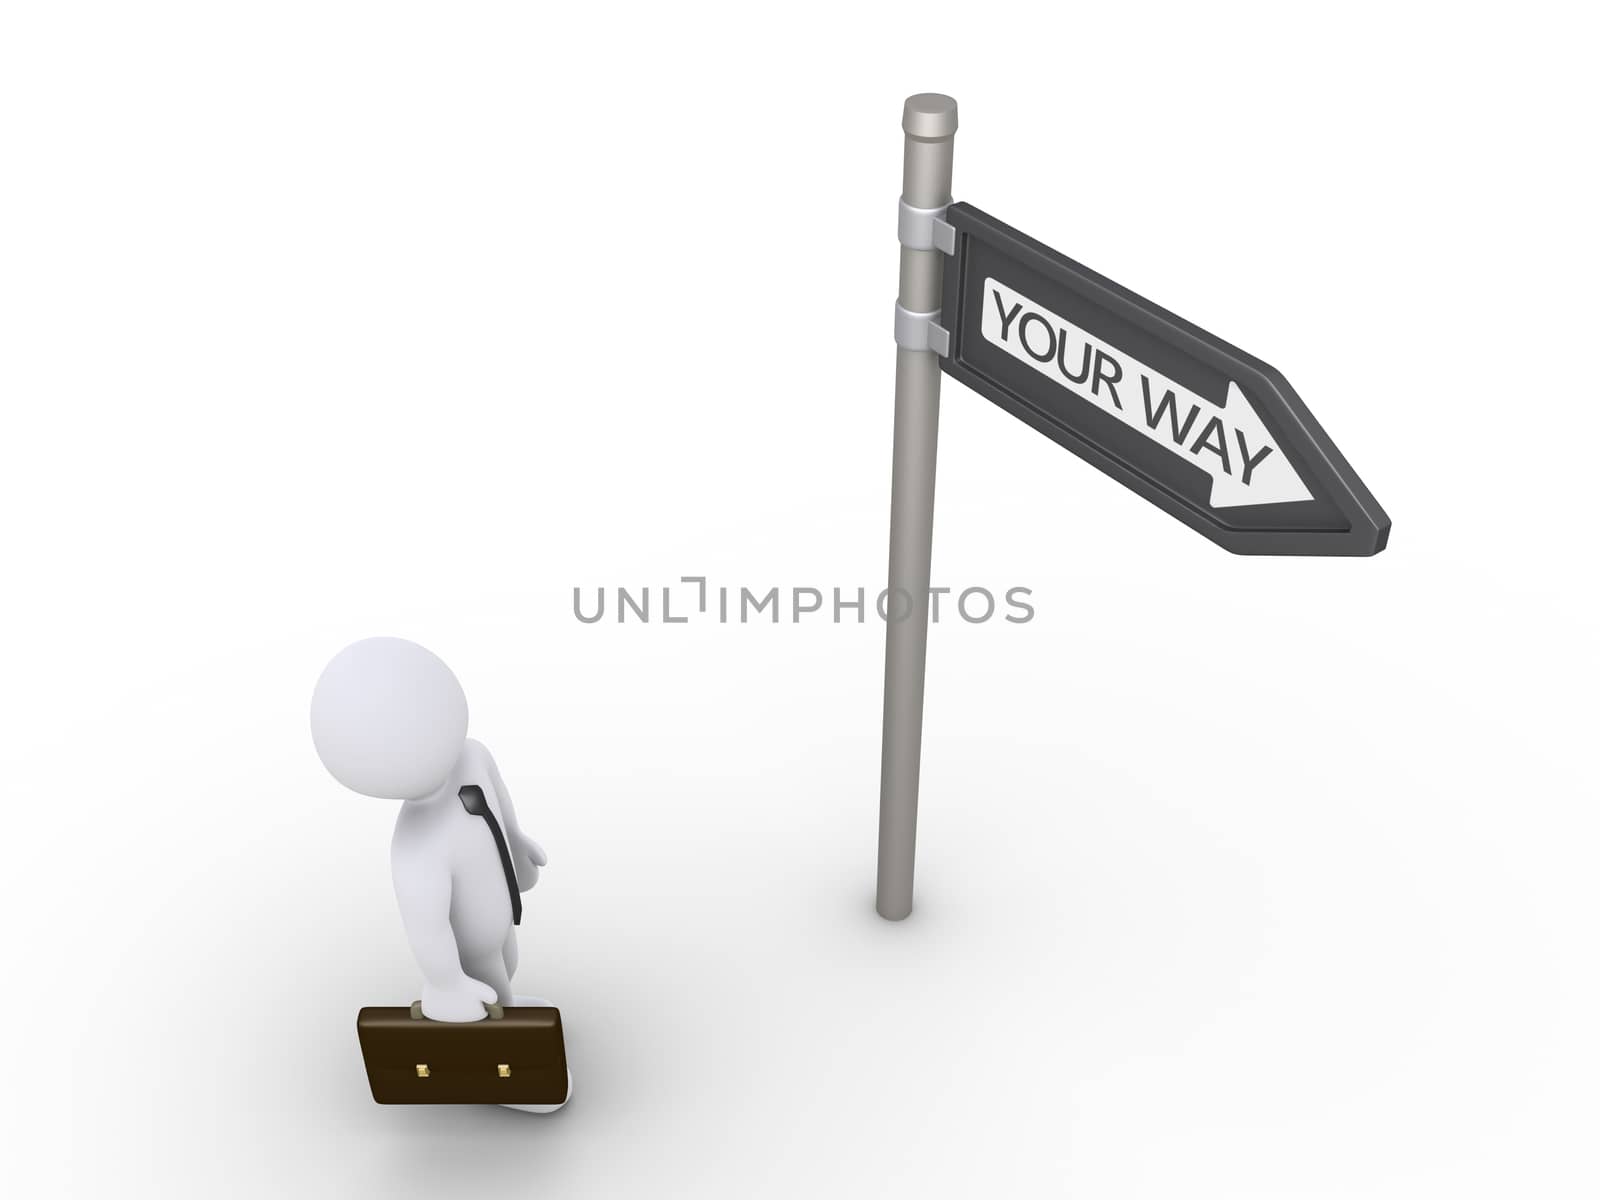 3d businessman is looking up at sign to find his path